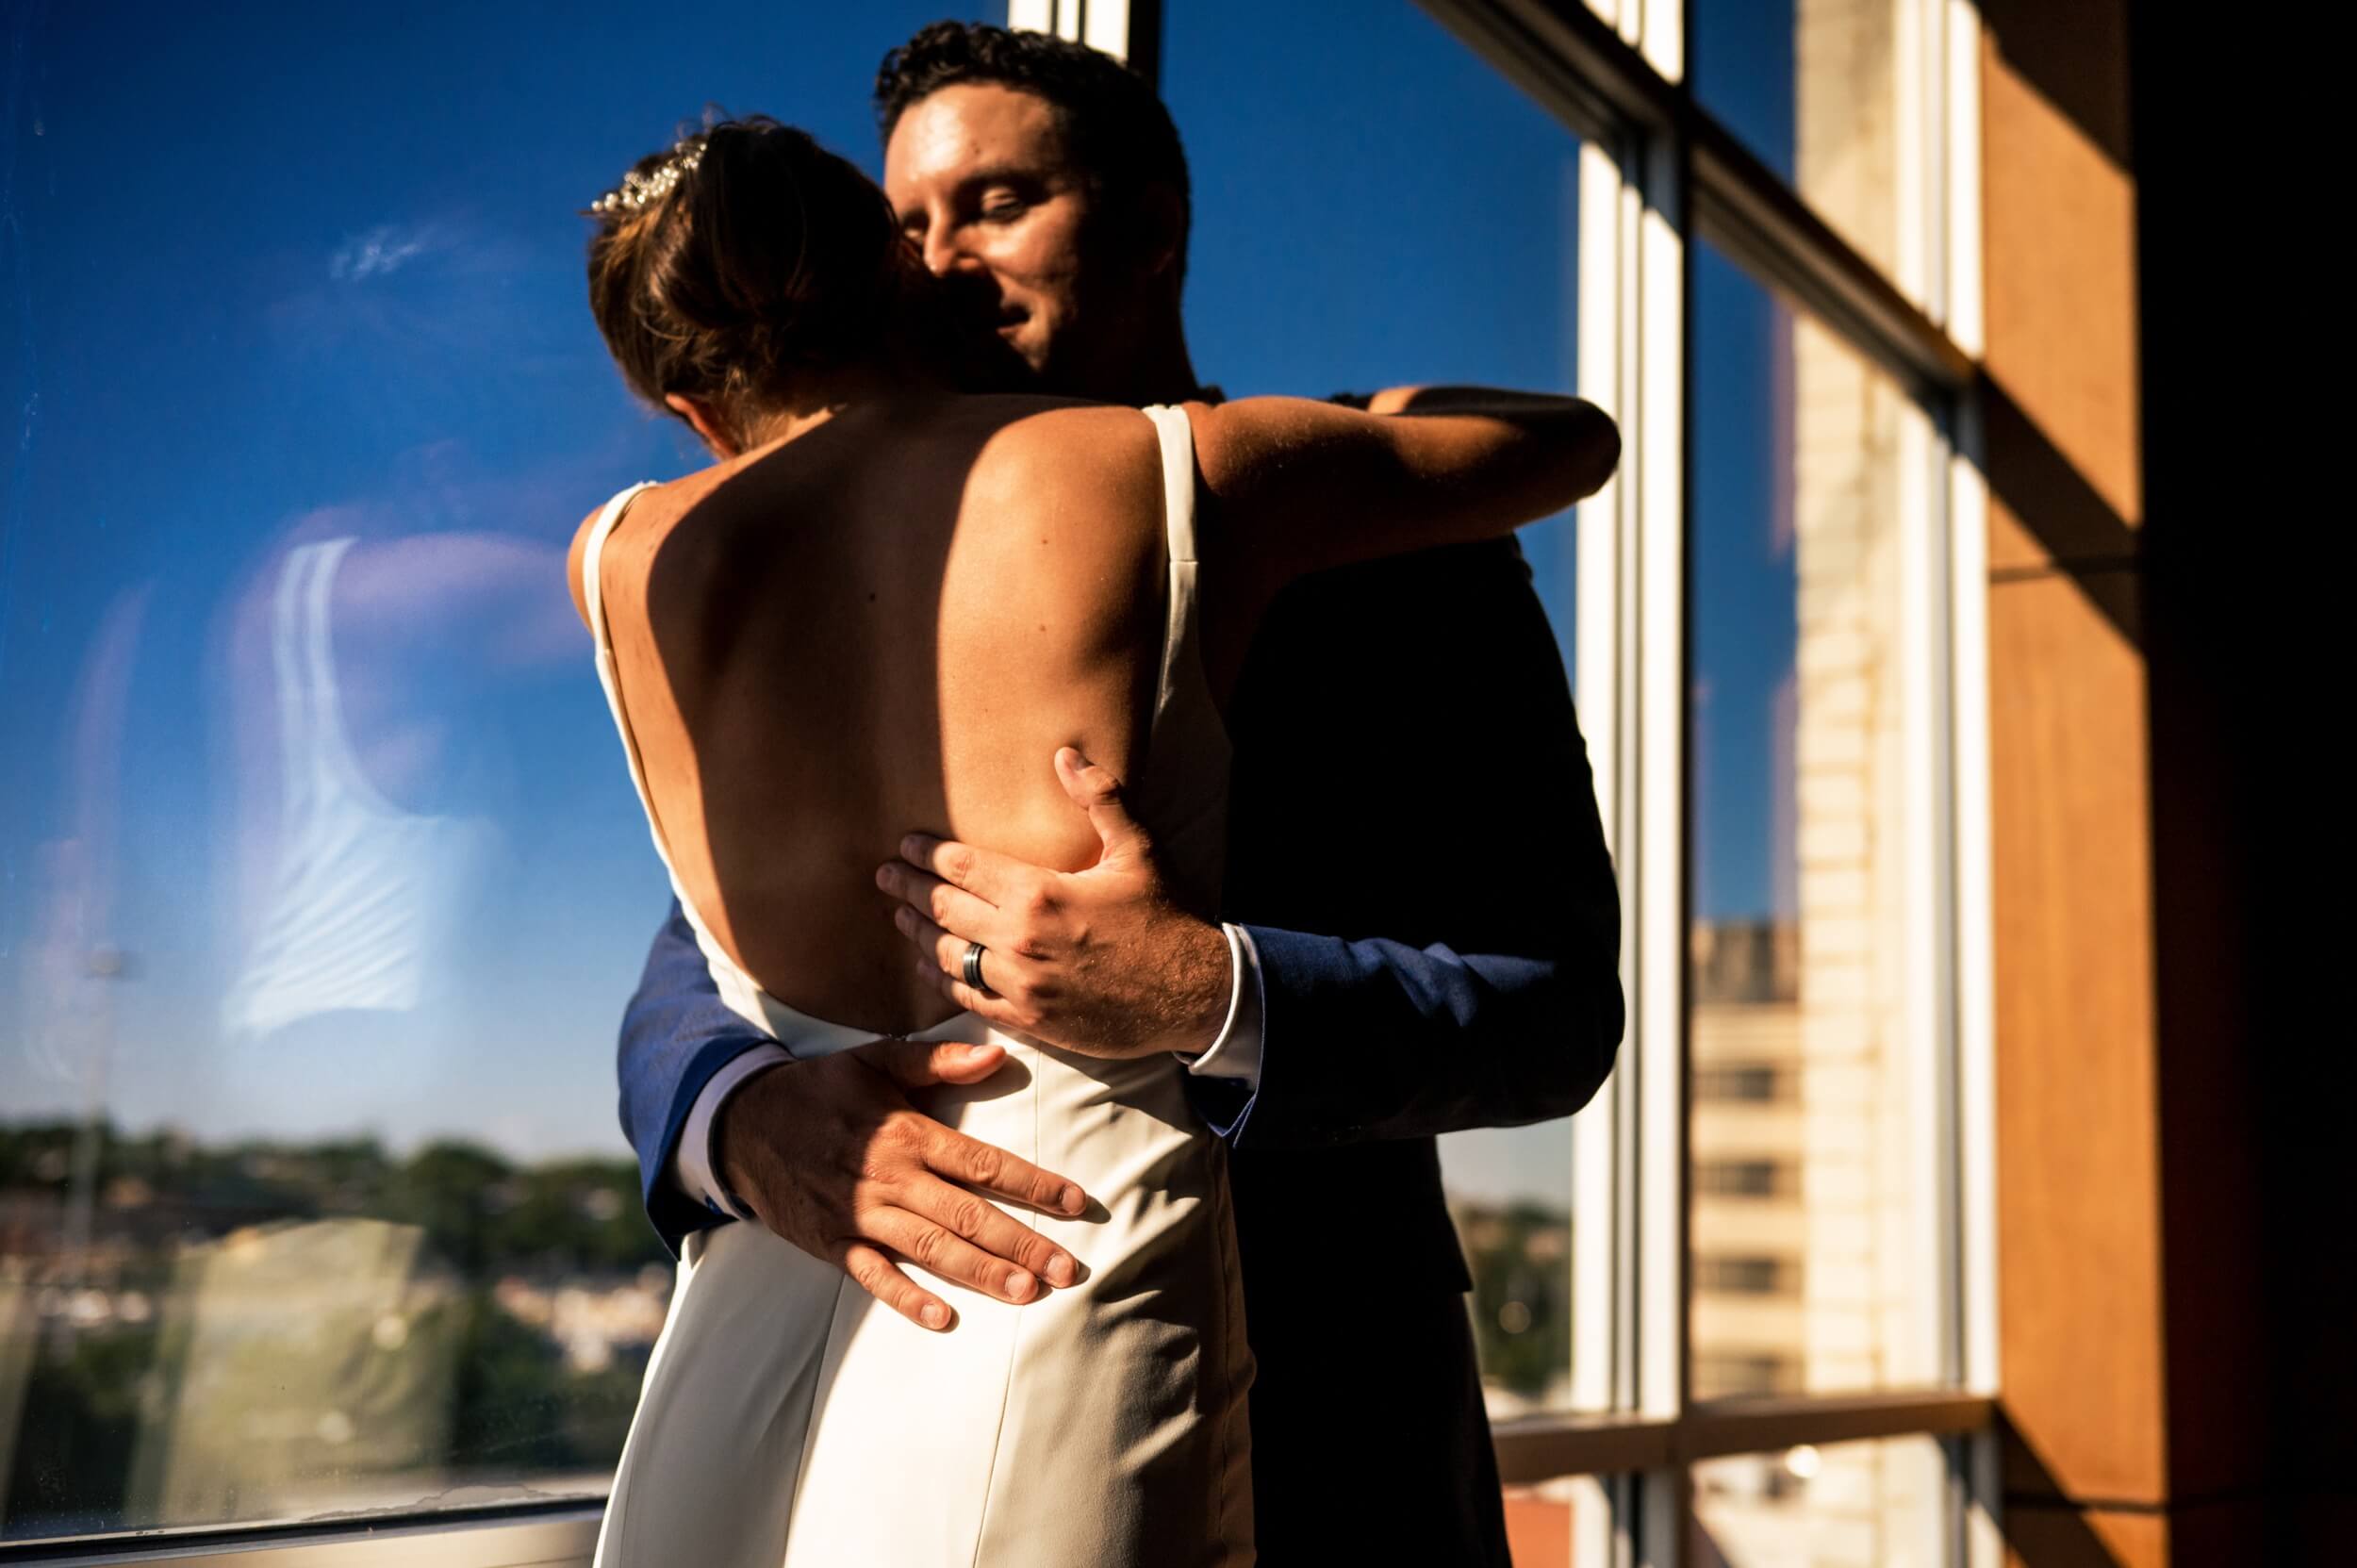 bride and groom hugging in front of a window at a washington dc winery wedding venue